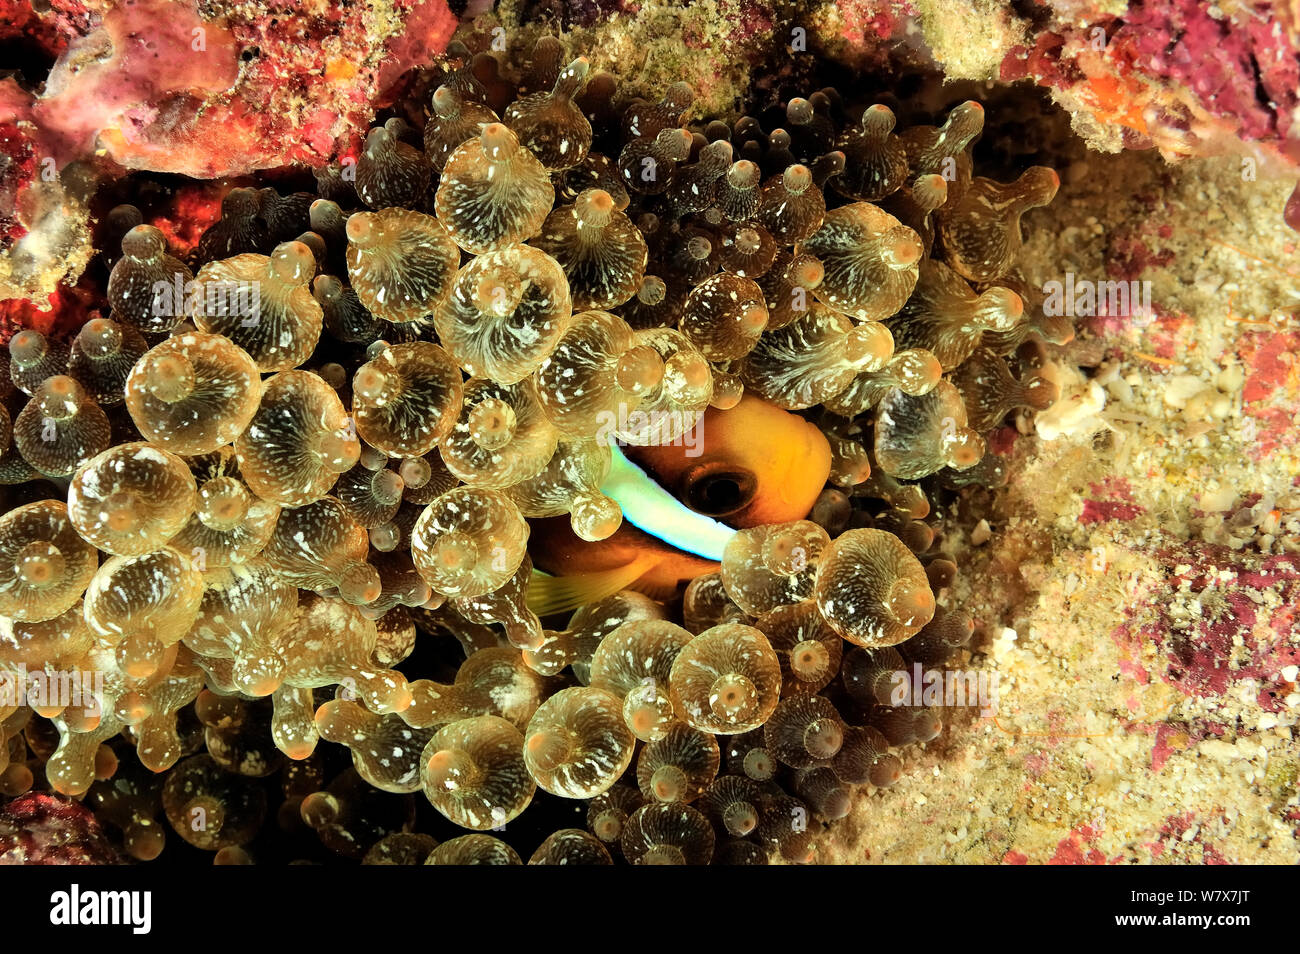 Clark's anemonefish (Amphiprion clarkii) in a Bulb-tentacle sea anemone (Entacmaea quadricolor) Maldives. Indian ocean. Stock Photo